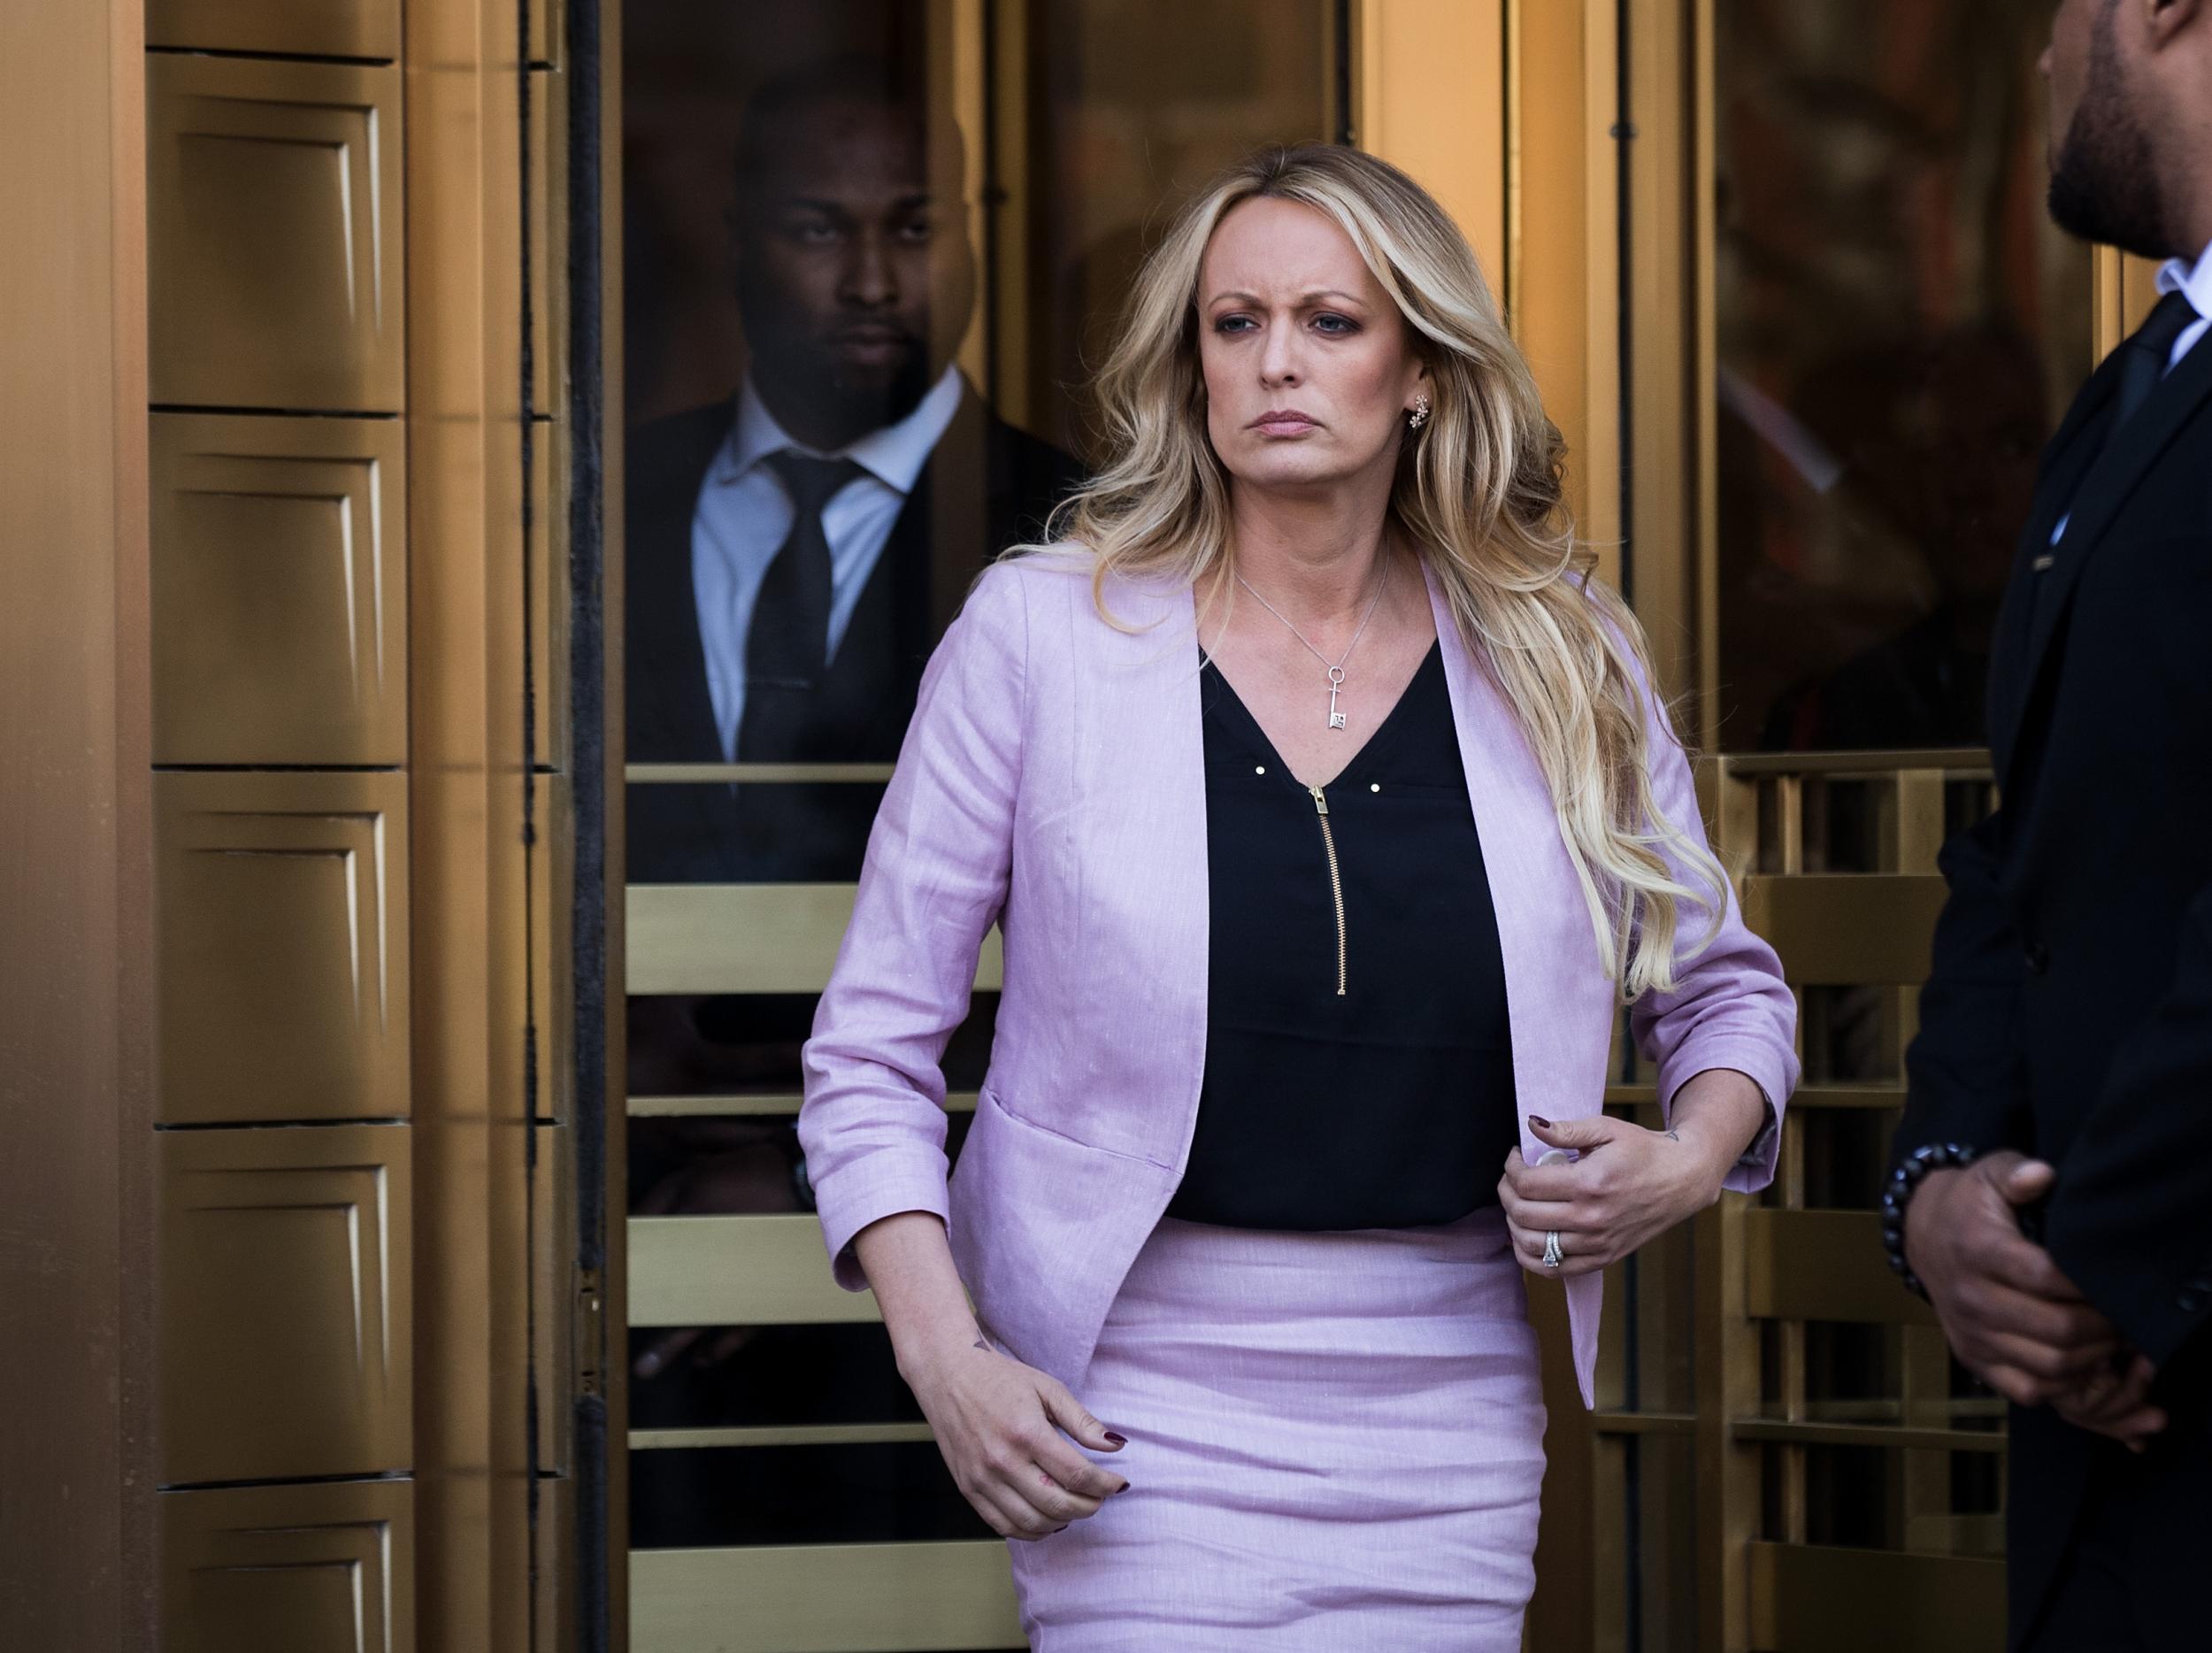 Adult film star Stormy Daniels enters stage left